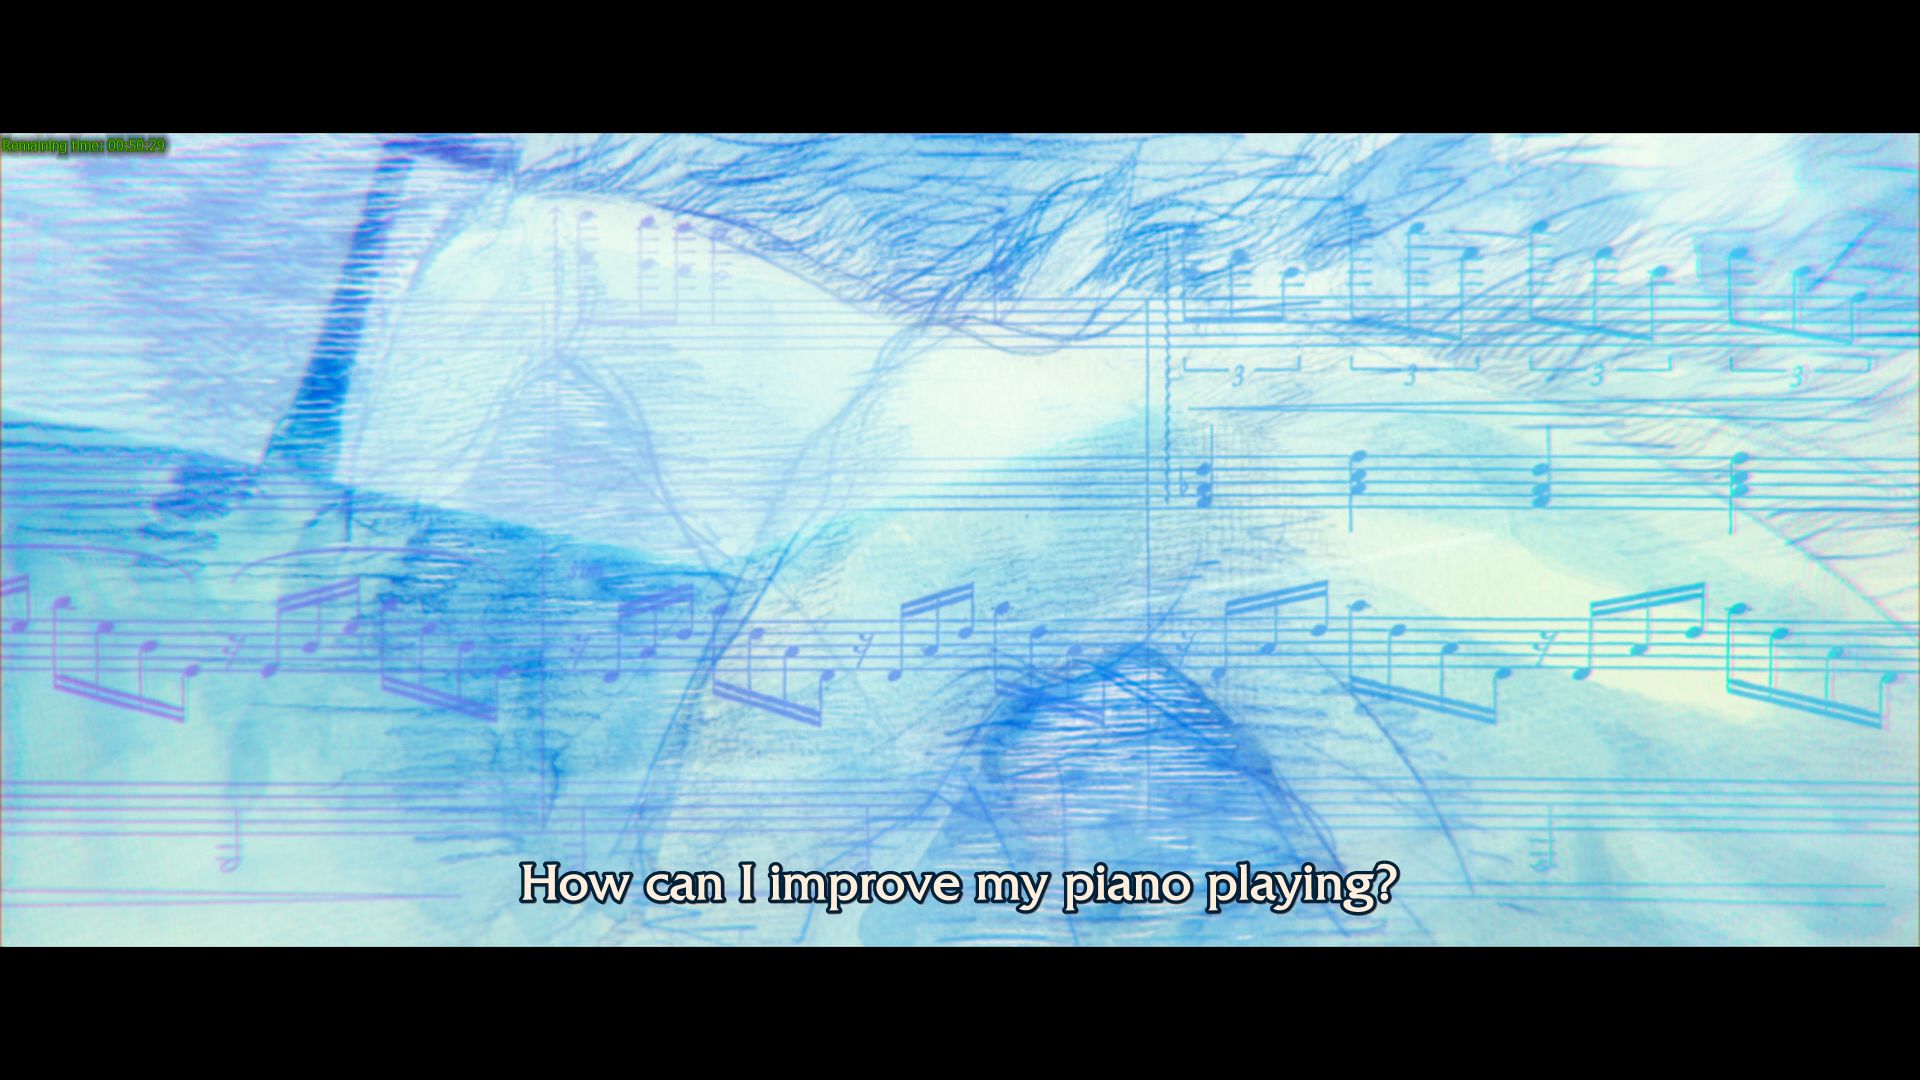 An uncomfortable amount of air time is spent on Shinji's struggles with the piano.